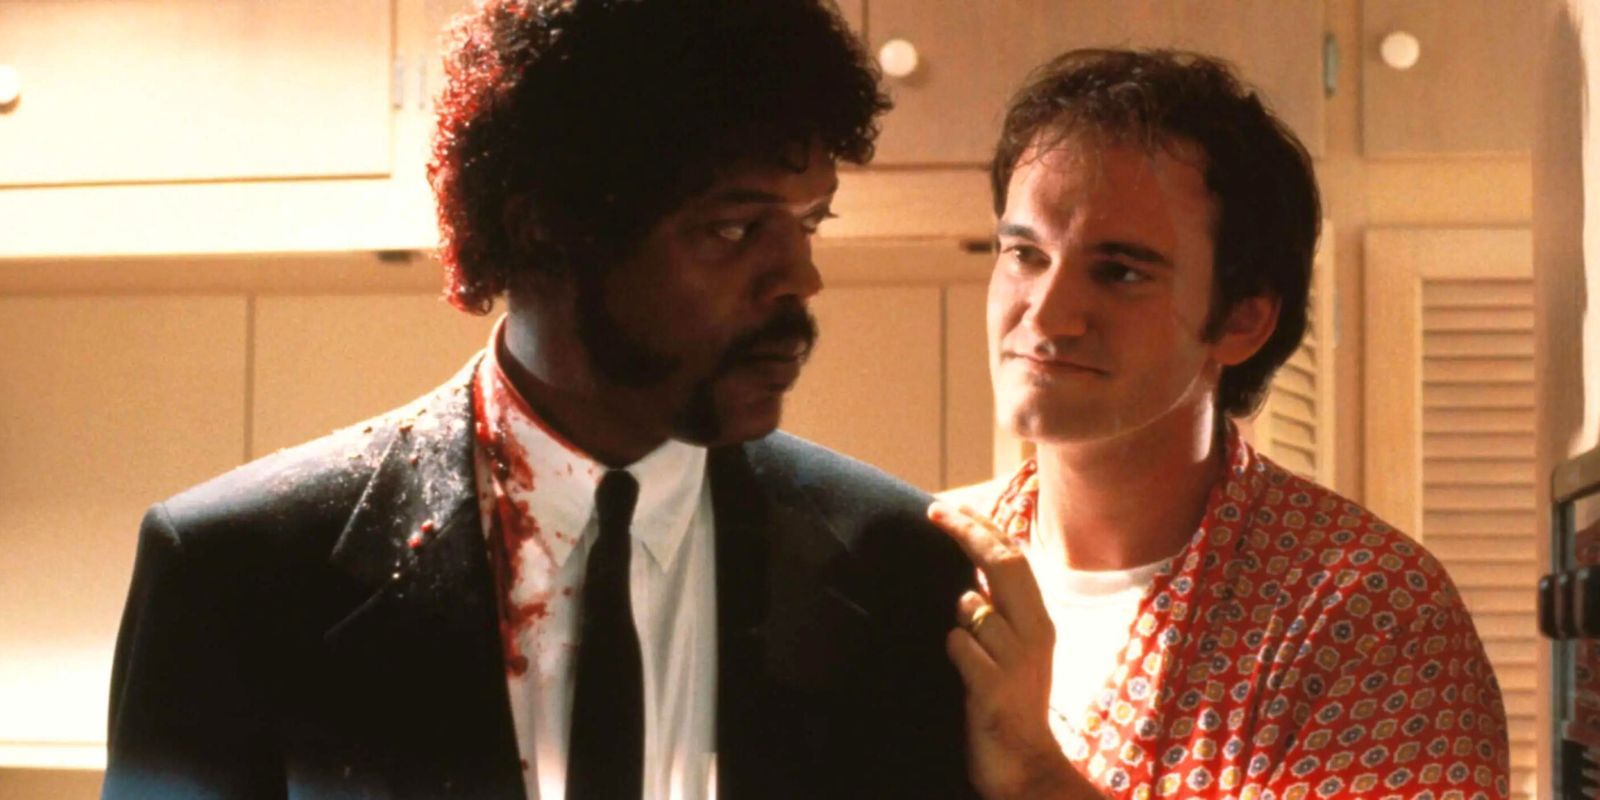 Samuel L. Jackson and Quentin Tarantino in Pulp Fiction